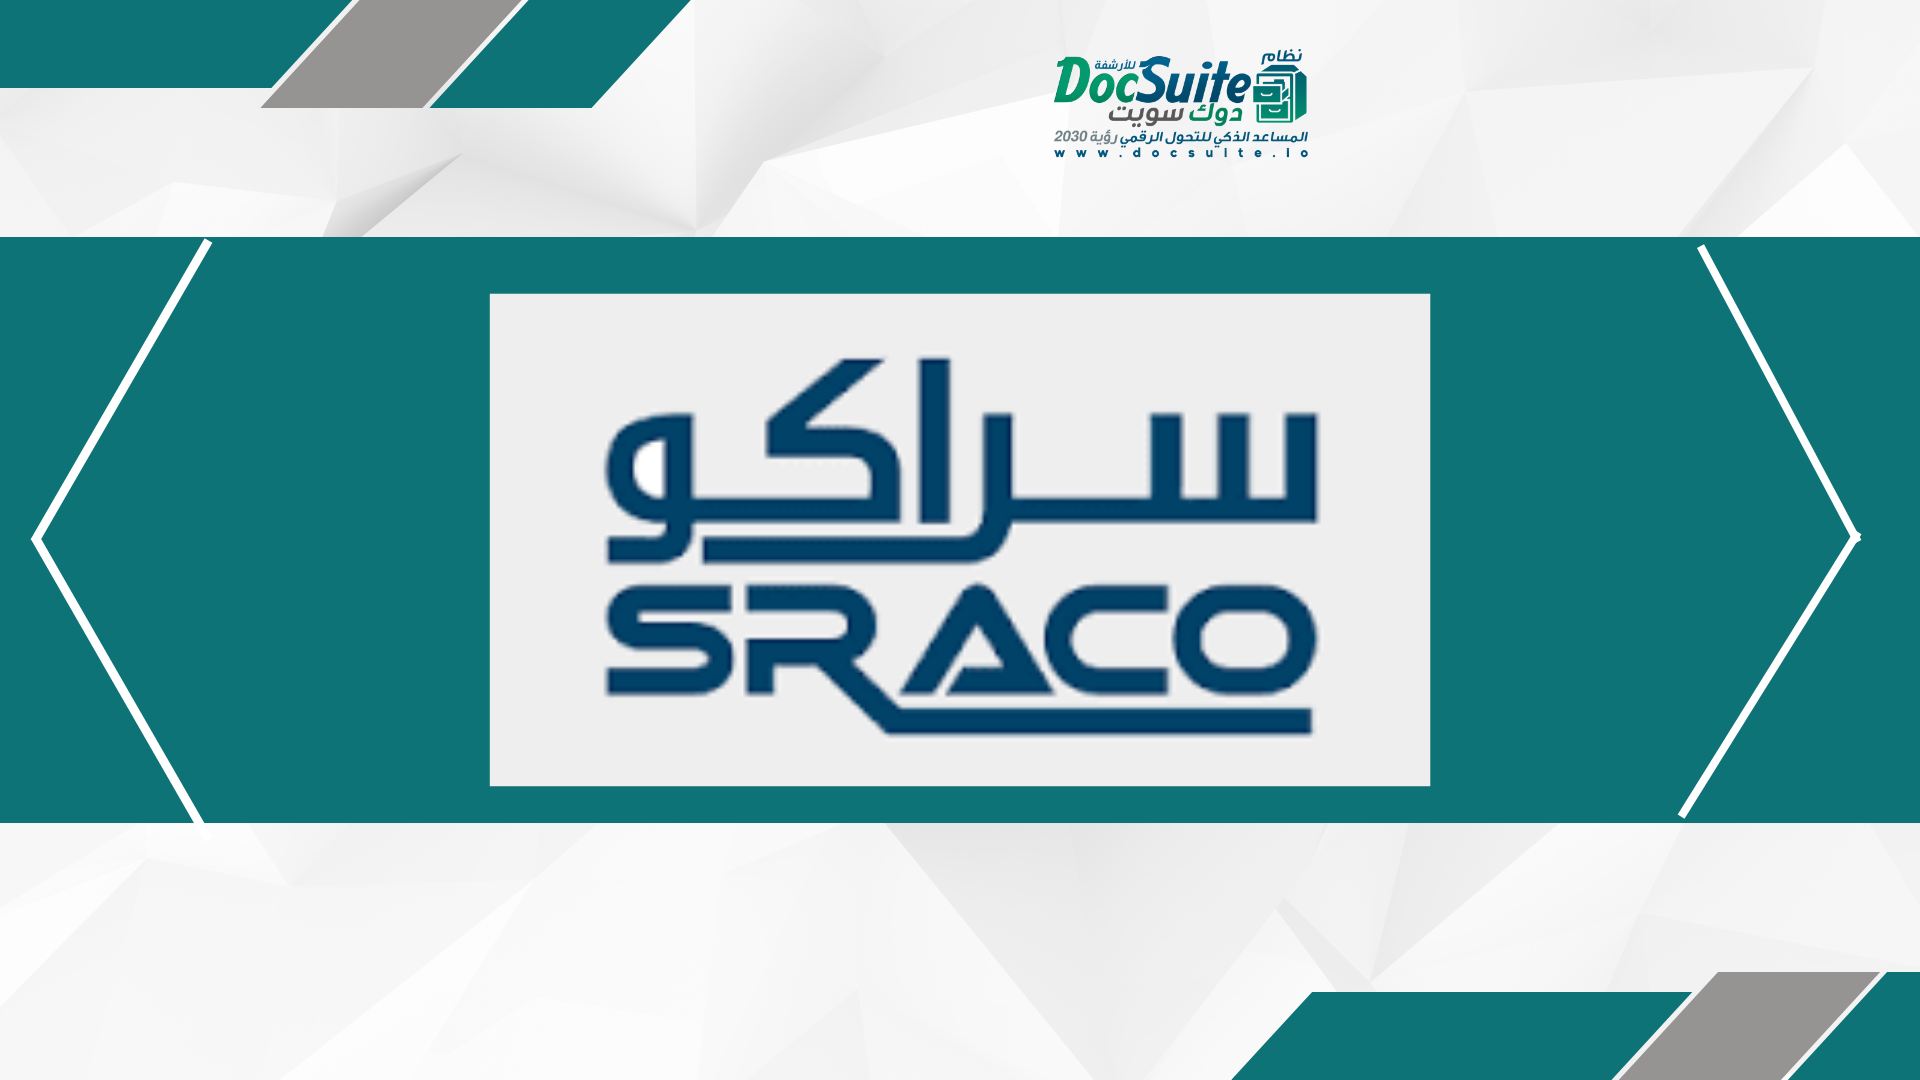 SRACO achieves success by improving electronic management